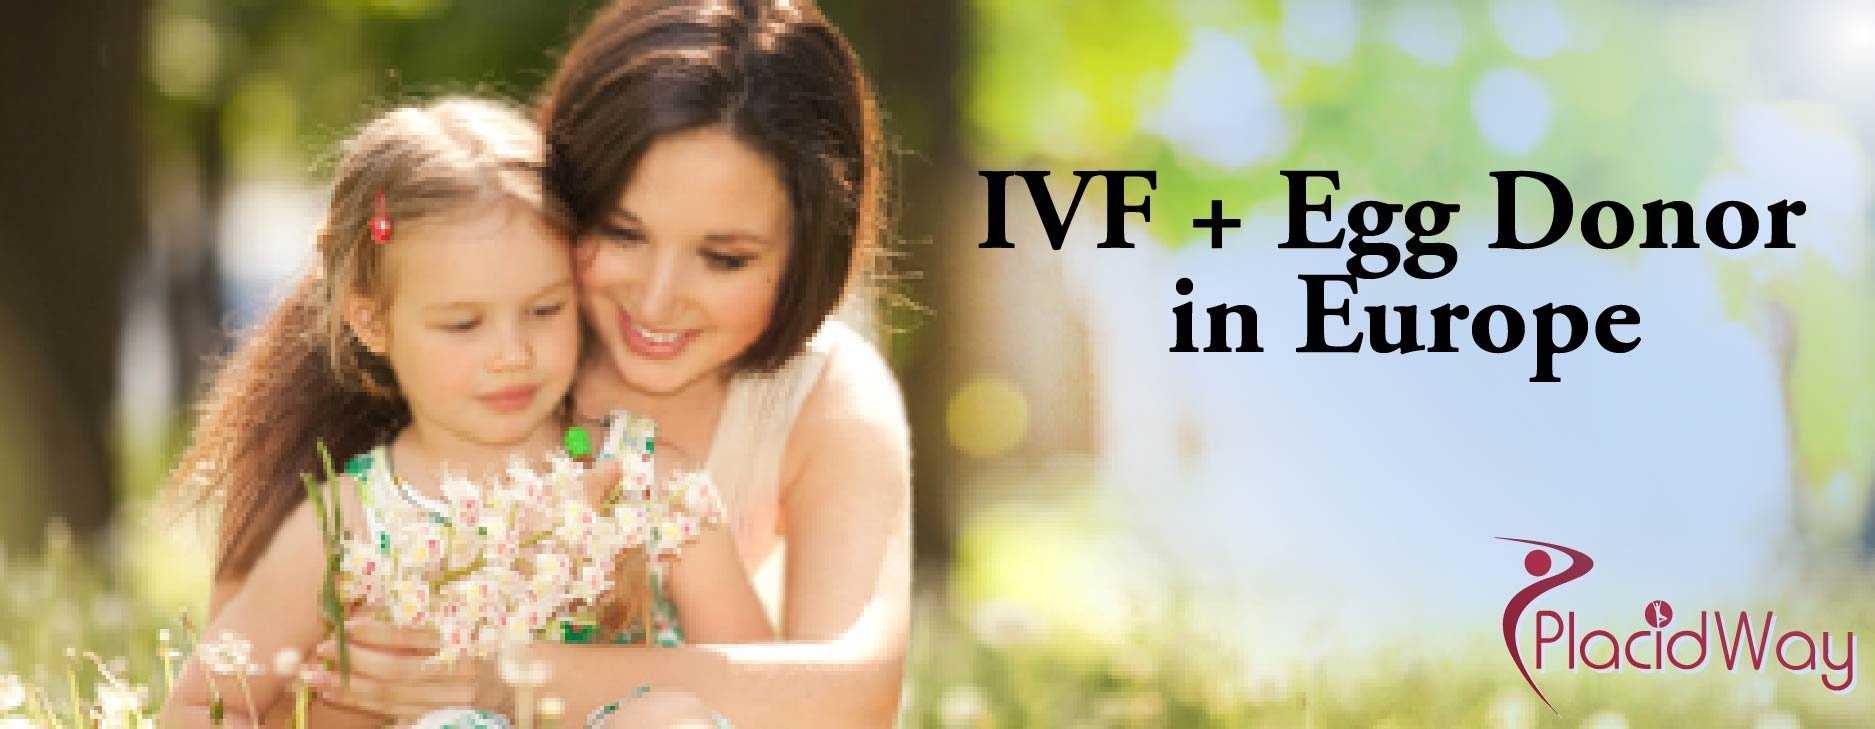 IVF Treatments Abroad, Best IVF with Egg Donor Clinic